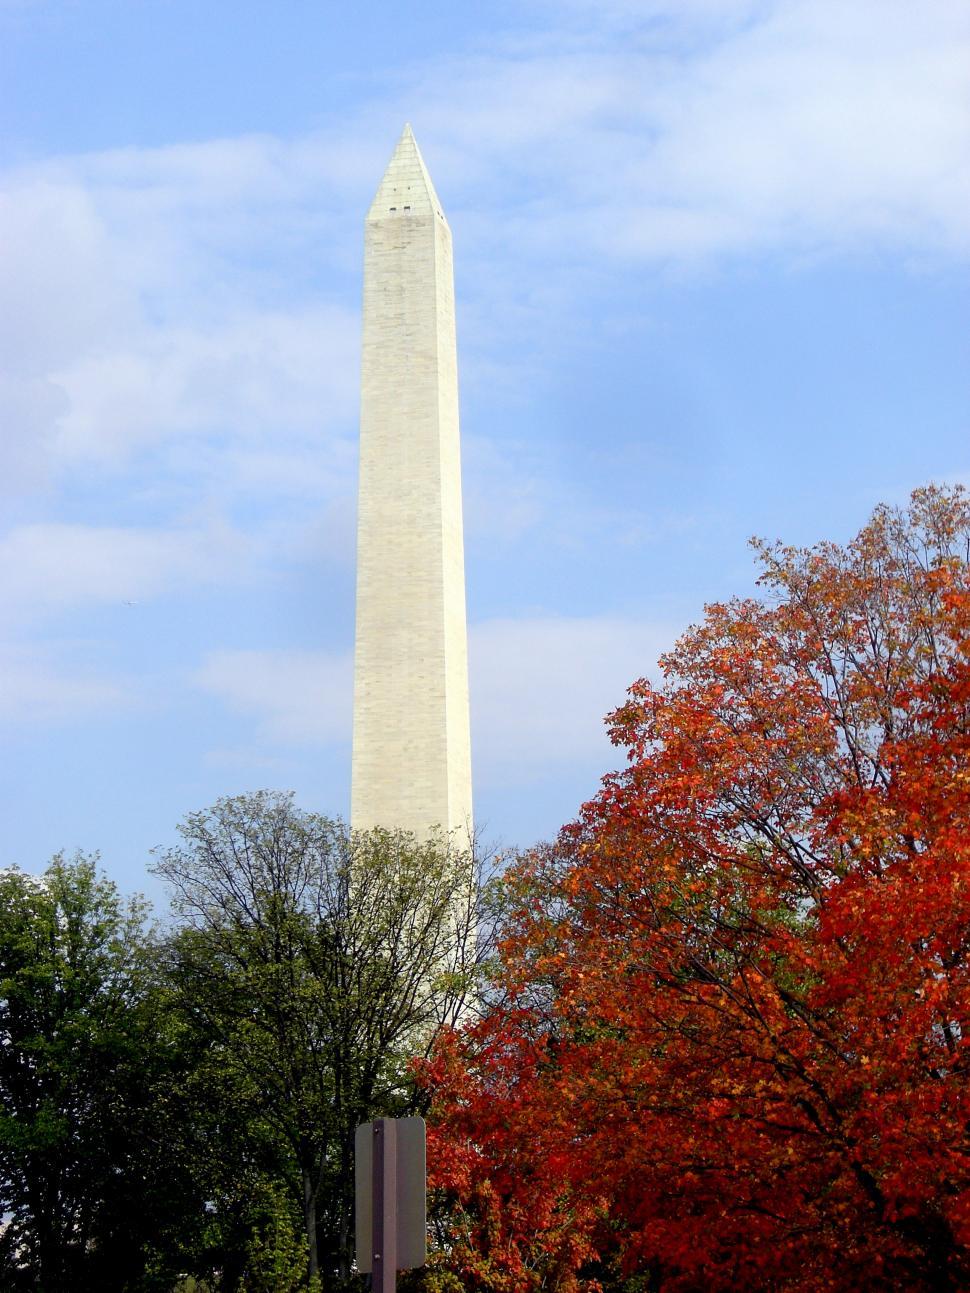 Free Image of Washington Monument Surrounded by Trees With Red Leaves 